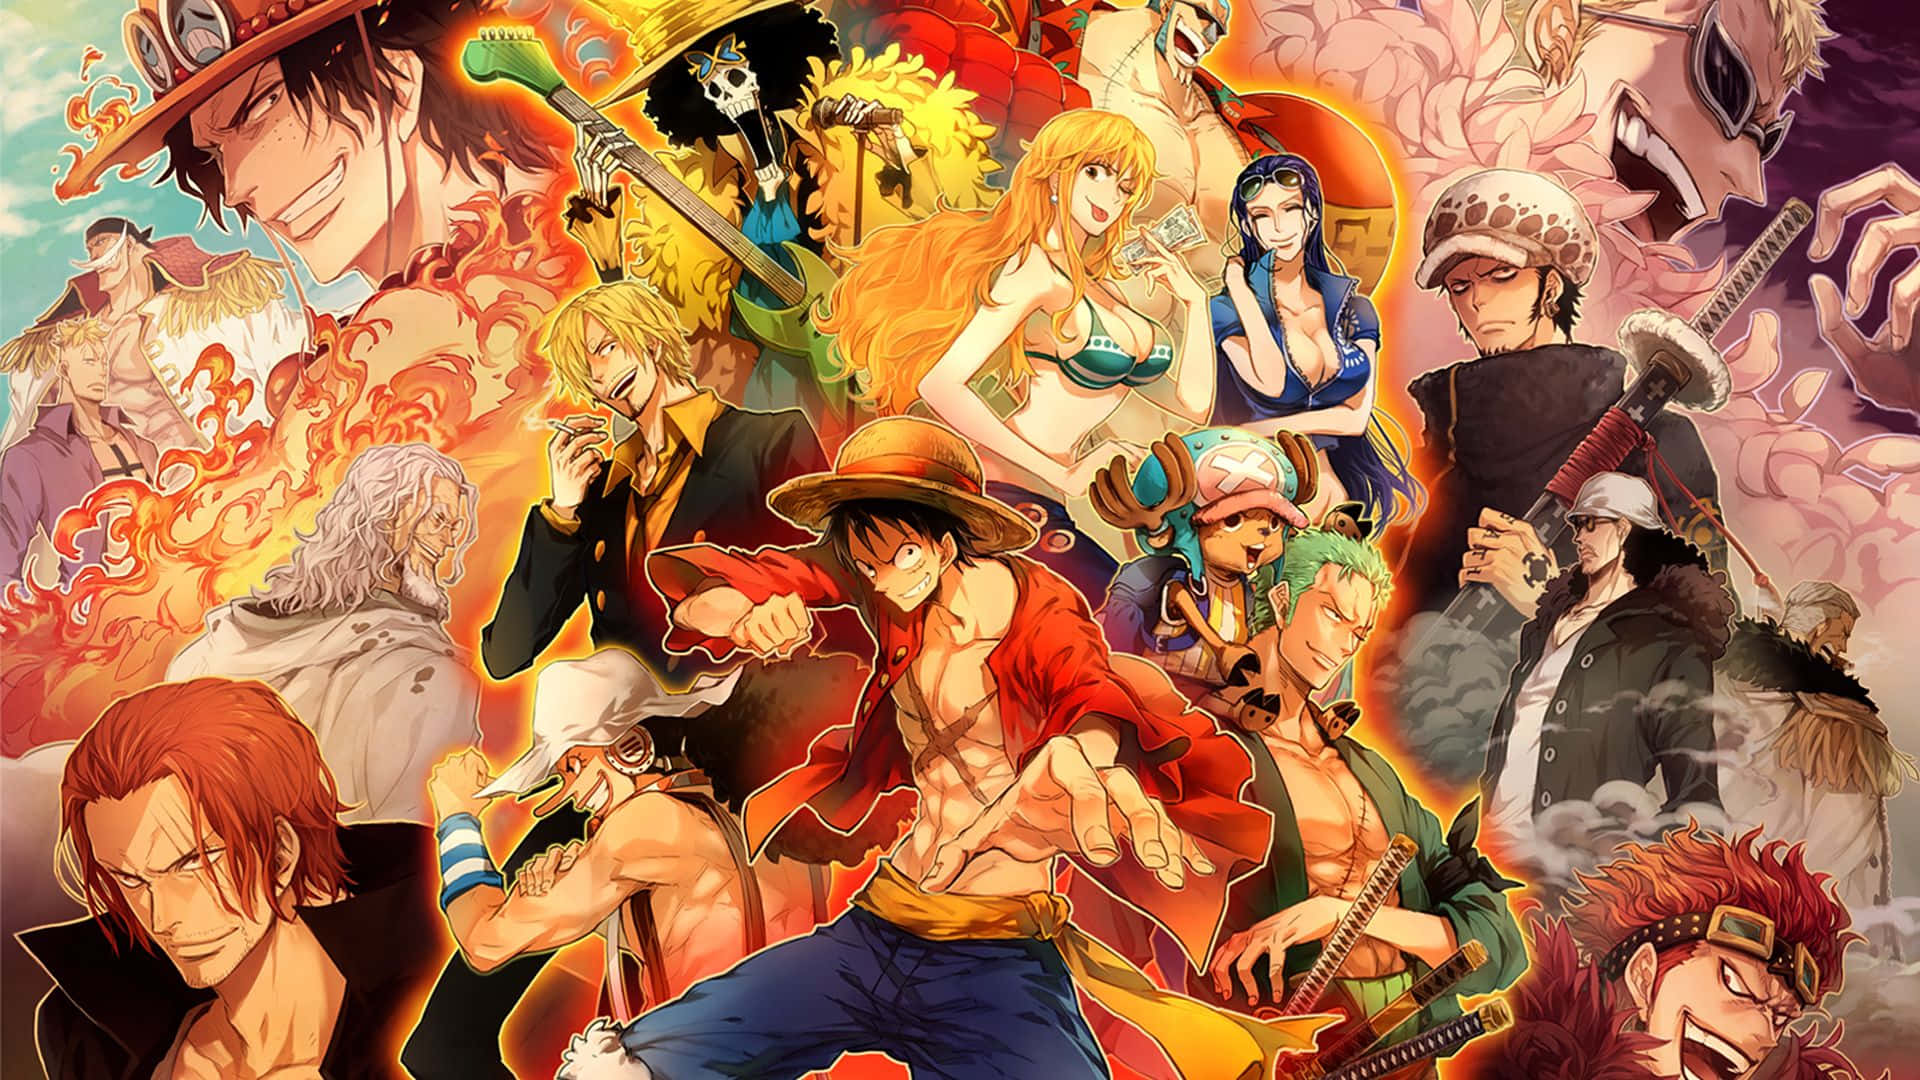 Cool One Piece Anime All Characters Hd Wallpaper